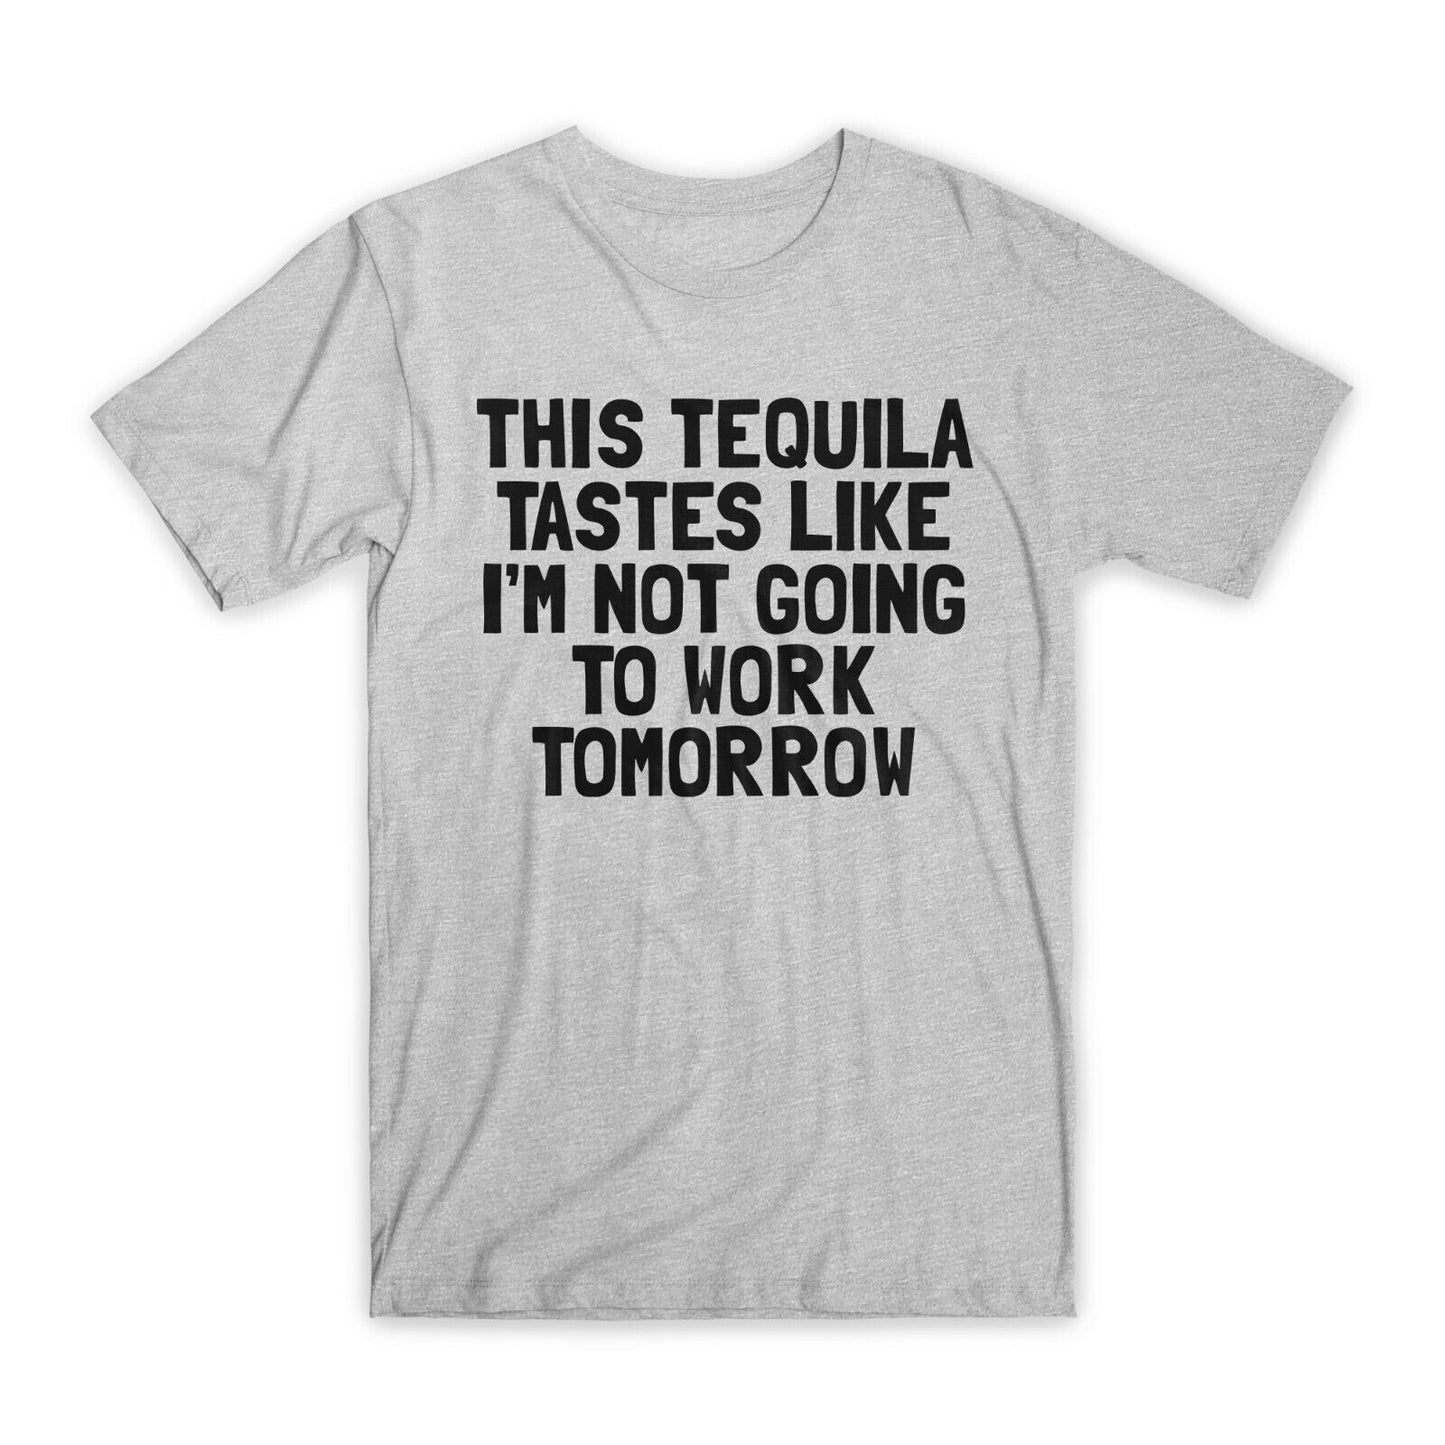 This Tequila Tastes Like T-Shirt Premium Soft Cotton Funny Tees Novelty Gift NEW